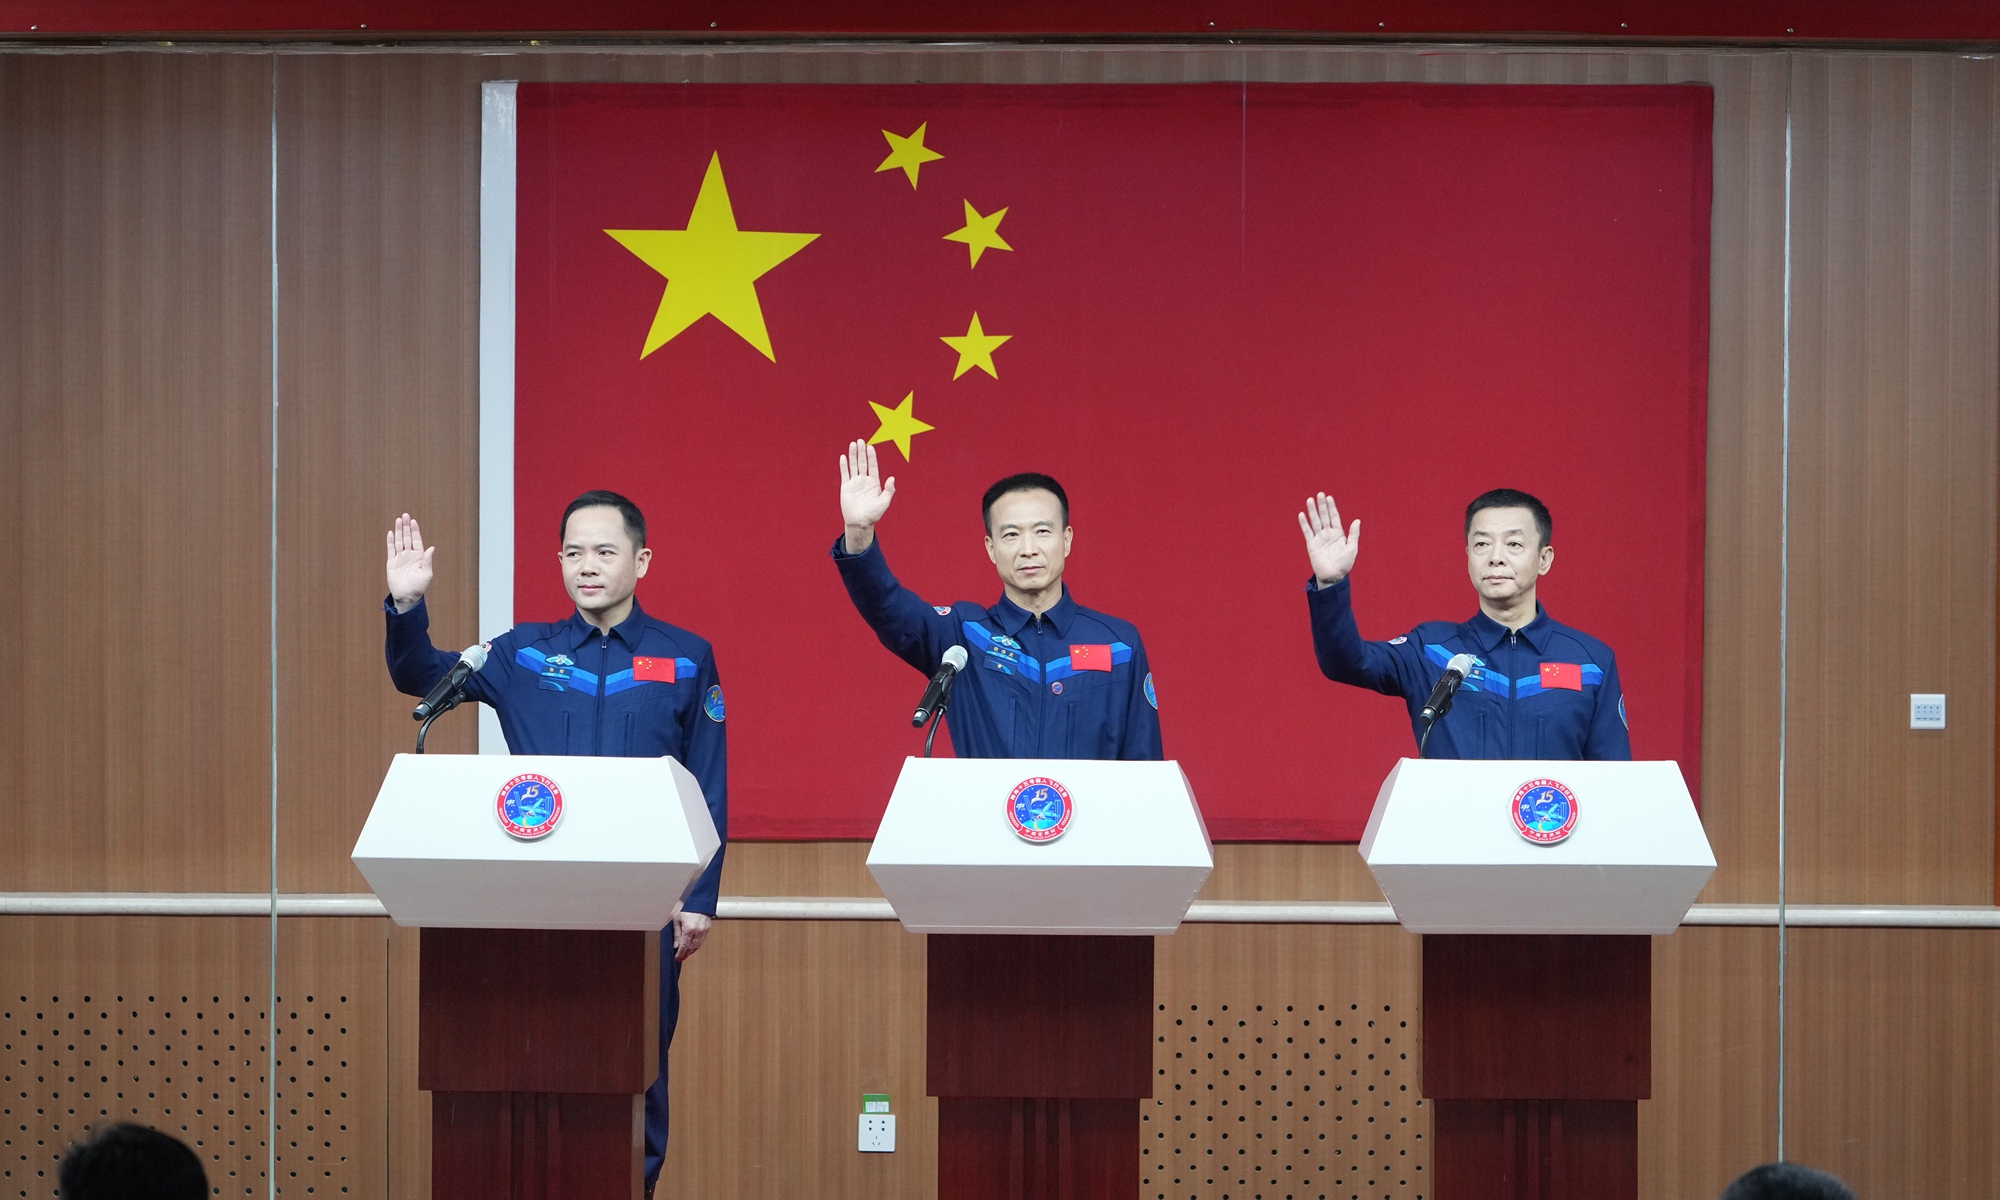 The three taikonauts of the Shenzhou-15 manned spaceflight mission meet with media at a press conference at the Jiuquan Satellite
Space Launch Center in Northwest China’s Gansu Province on November 28, 2022. The trio is led by mission commander Fei
Junlong (center) with two space newcomers Zhang Lu (left) and Deng Qingming. Photo: Xinhua